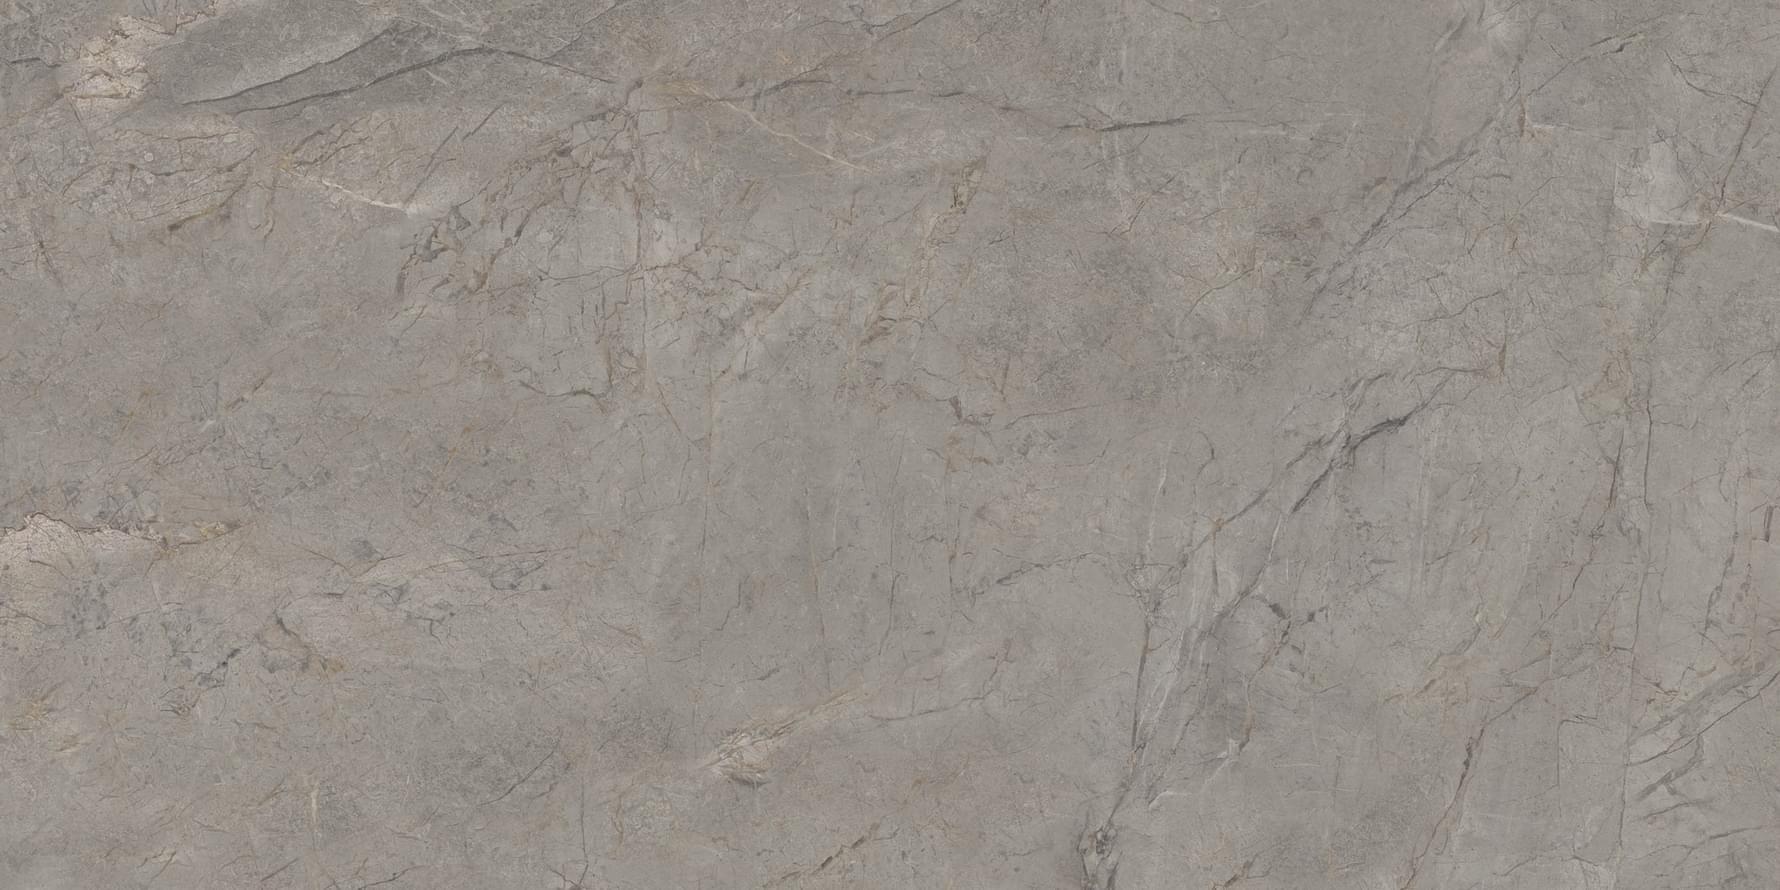 Keope Elements Lux Silver Grey Natural 30x60